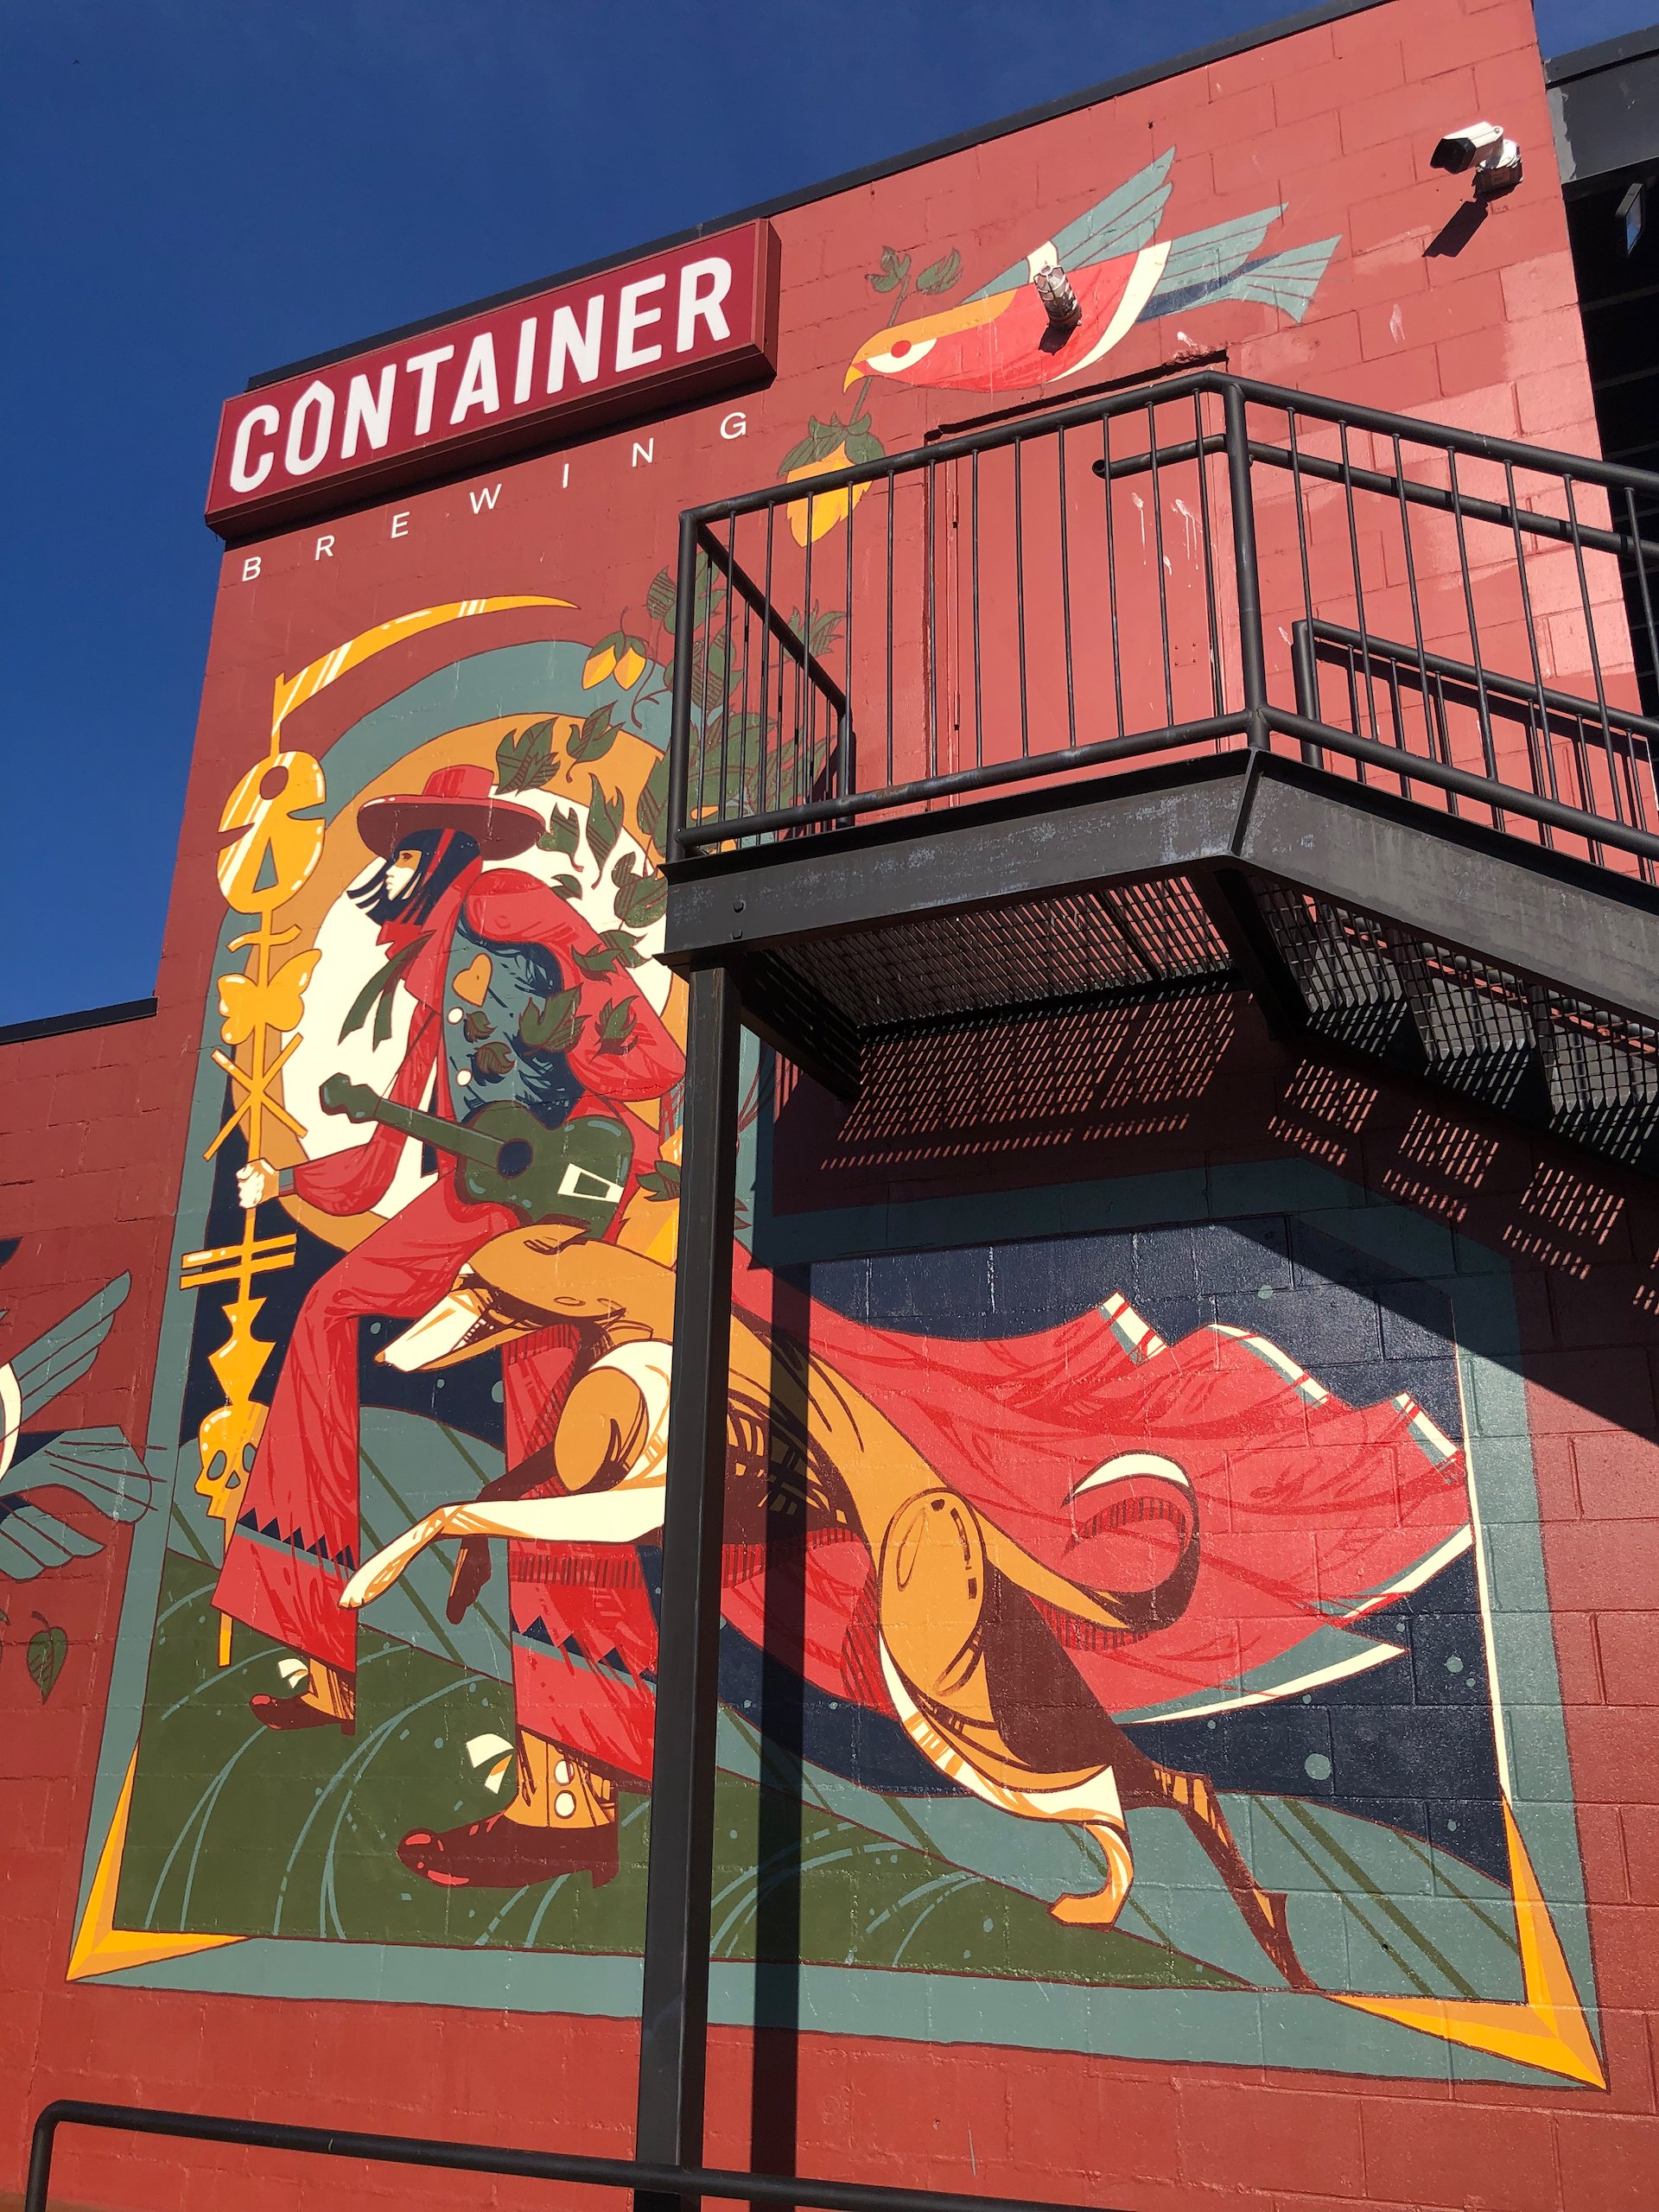  Container Brewing was a stop mid-way through our day. Great beer, and some cool art. 